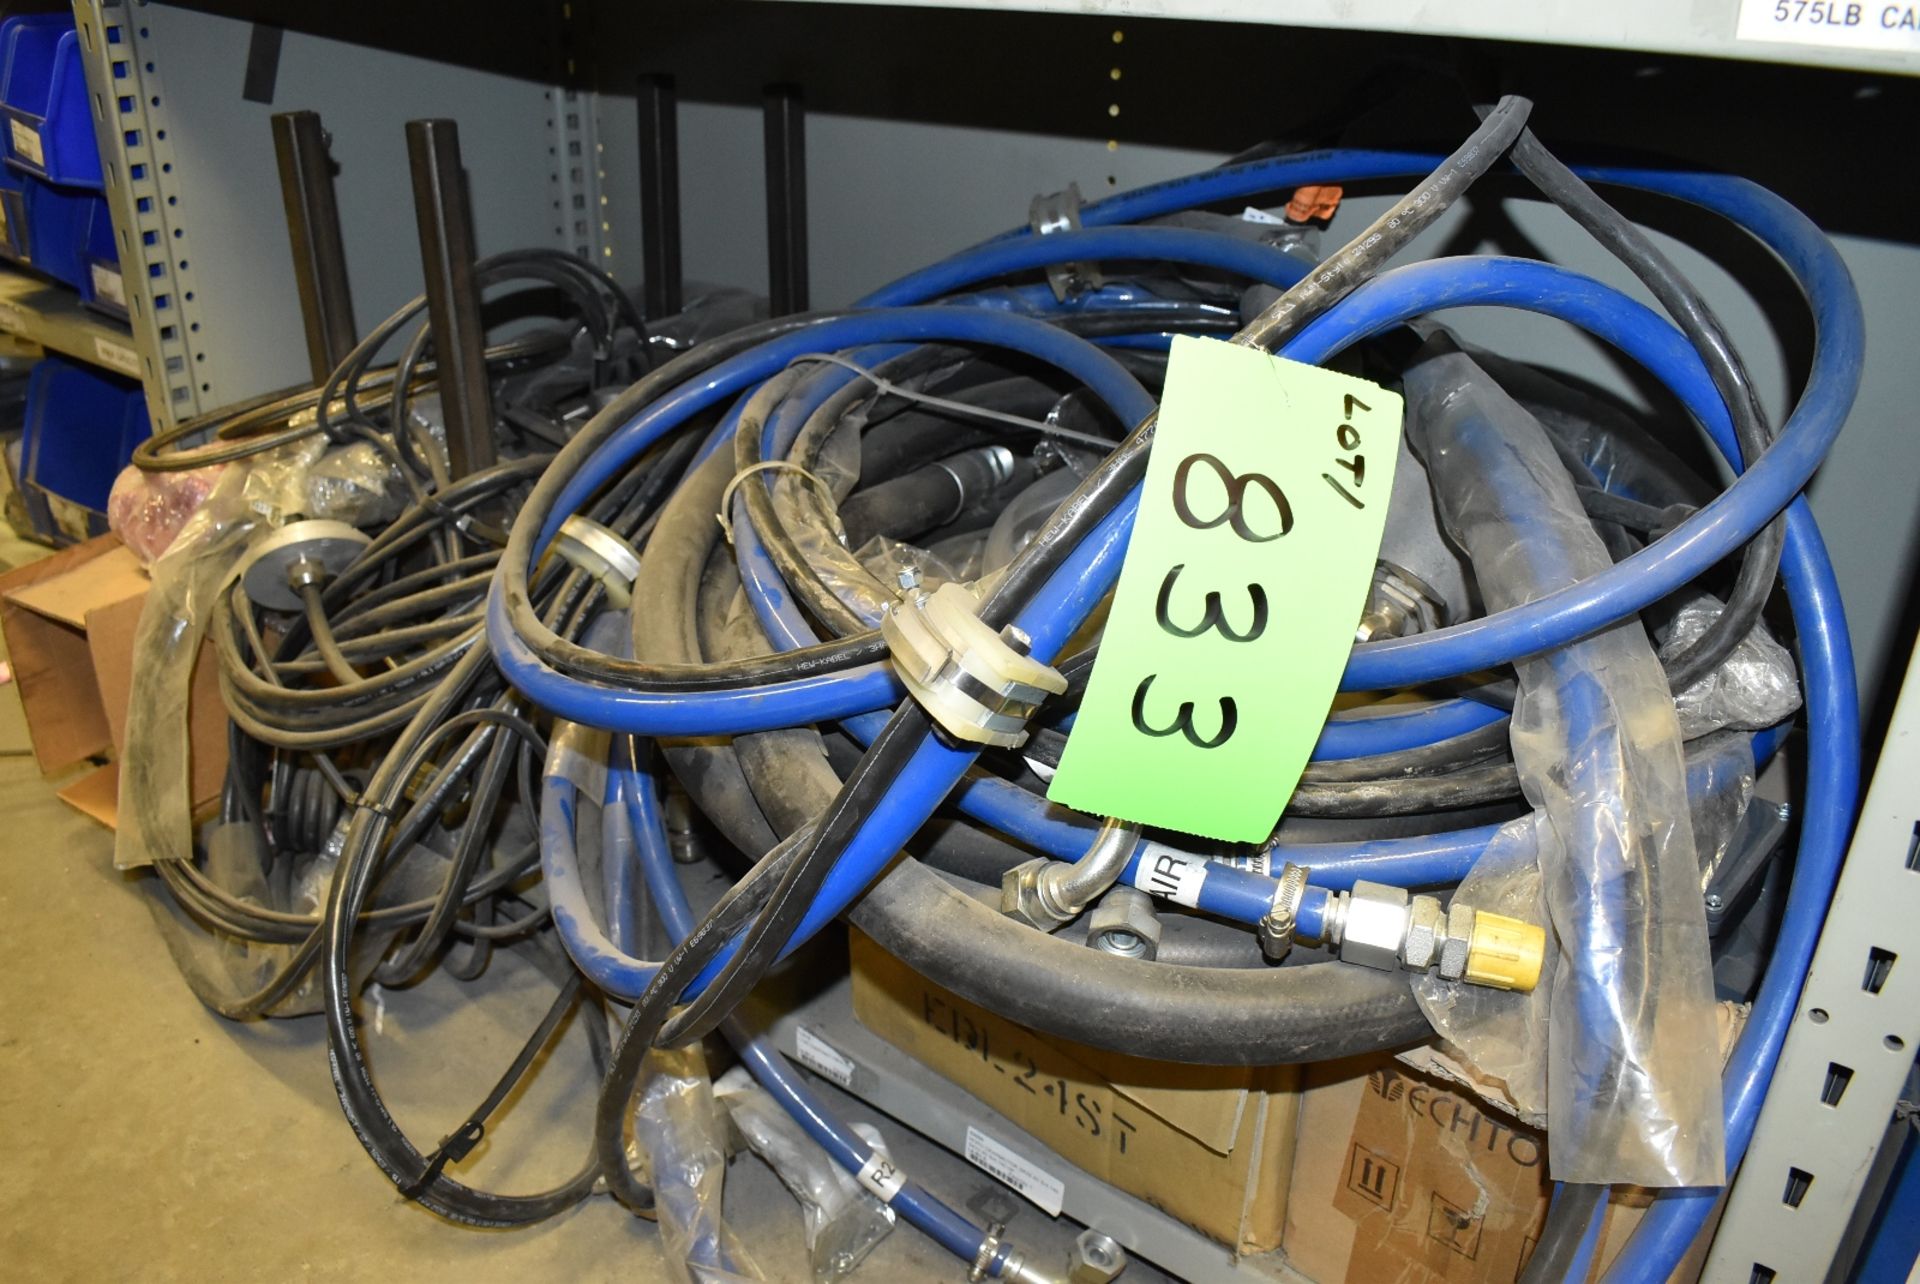 LOT/ CONTENTS OF SHELF INCLUDING AIR & WATER LINES, SPARE PARTS & MROs